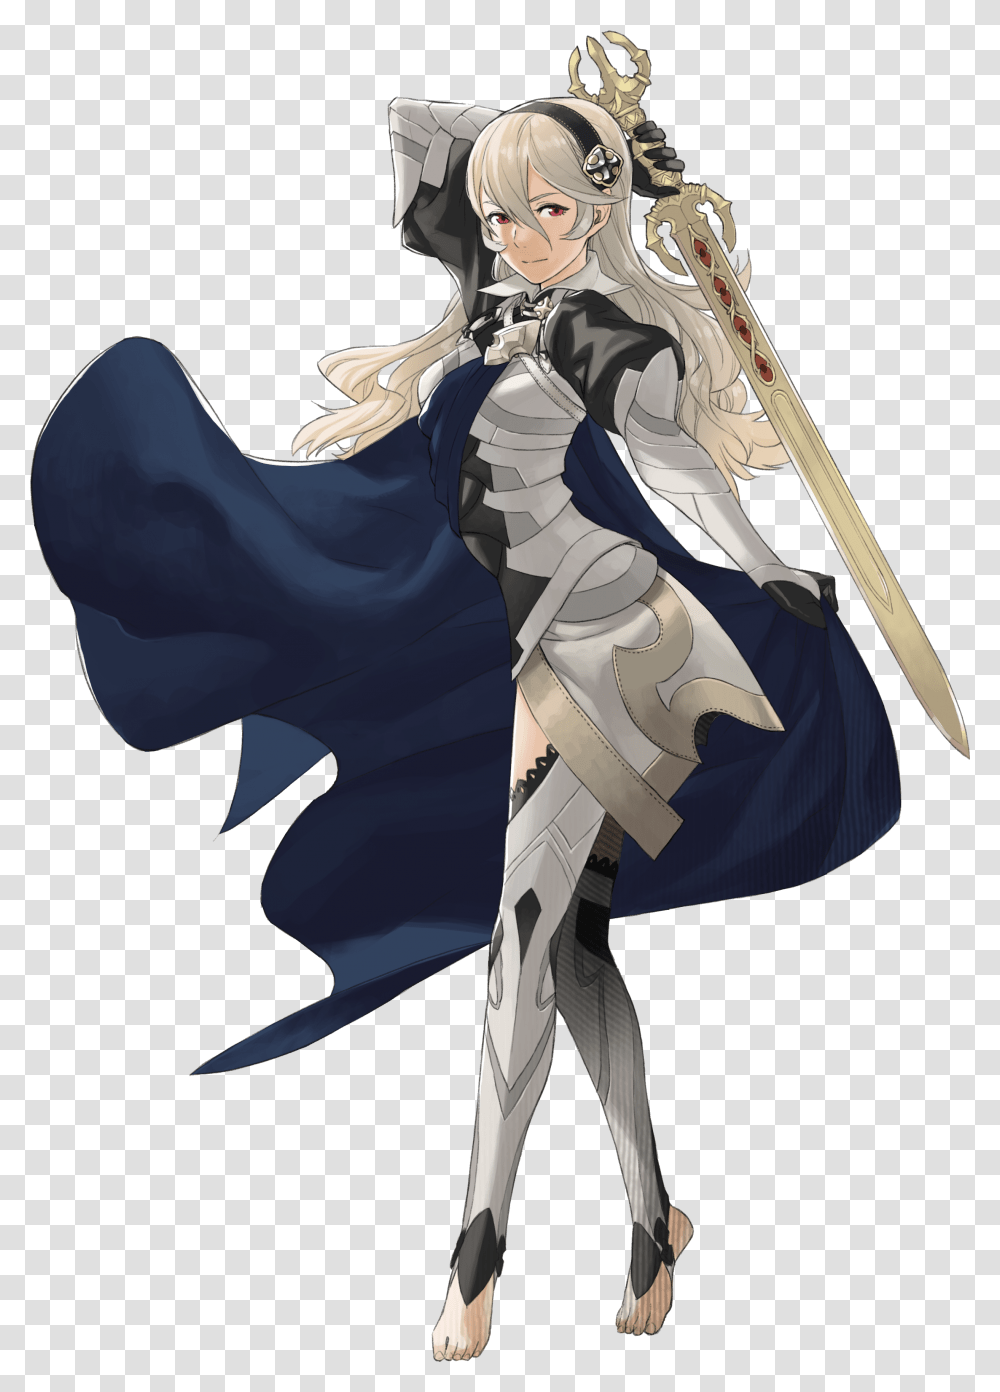 Corrin Female From Fire Emblem Fates Corrin Fire Emblem Female, Person, Human, Clothing, Apparel Transparent Png